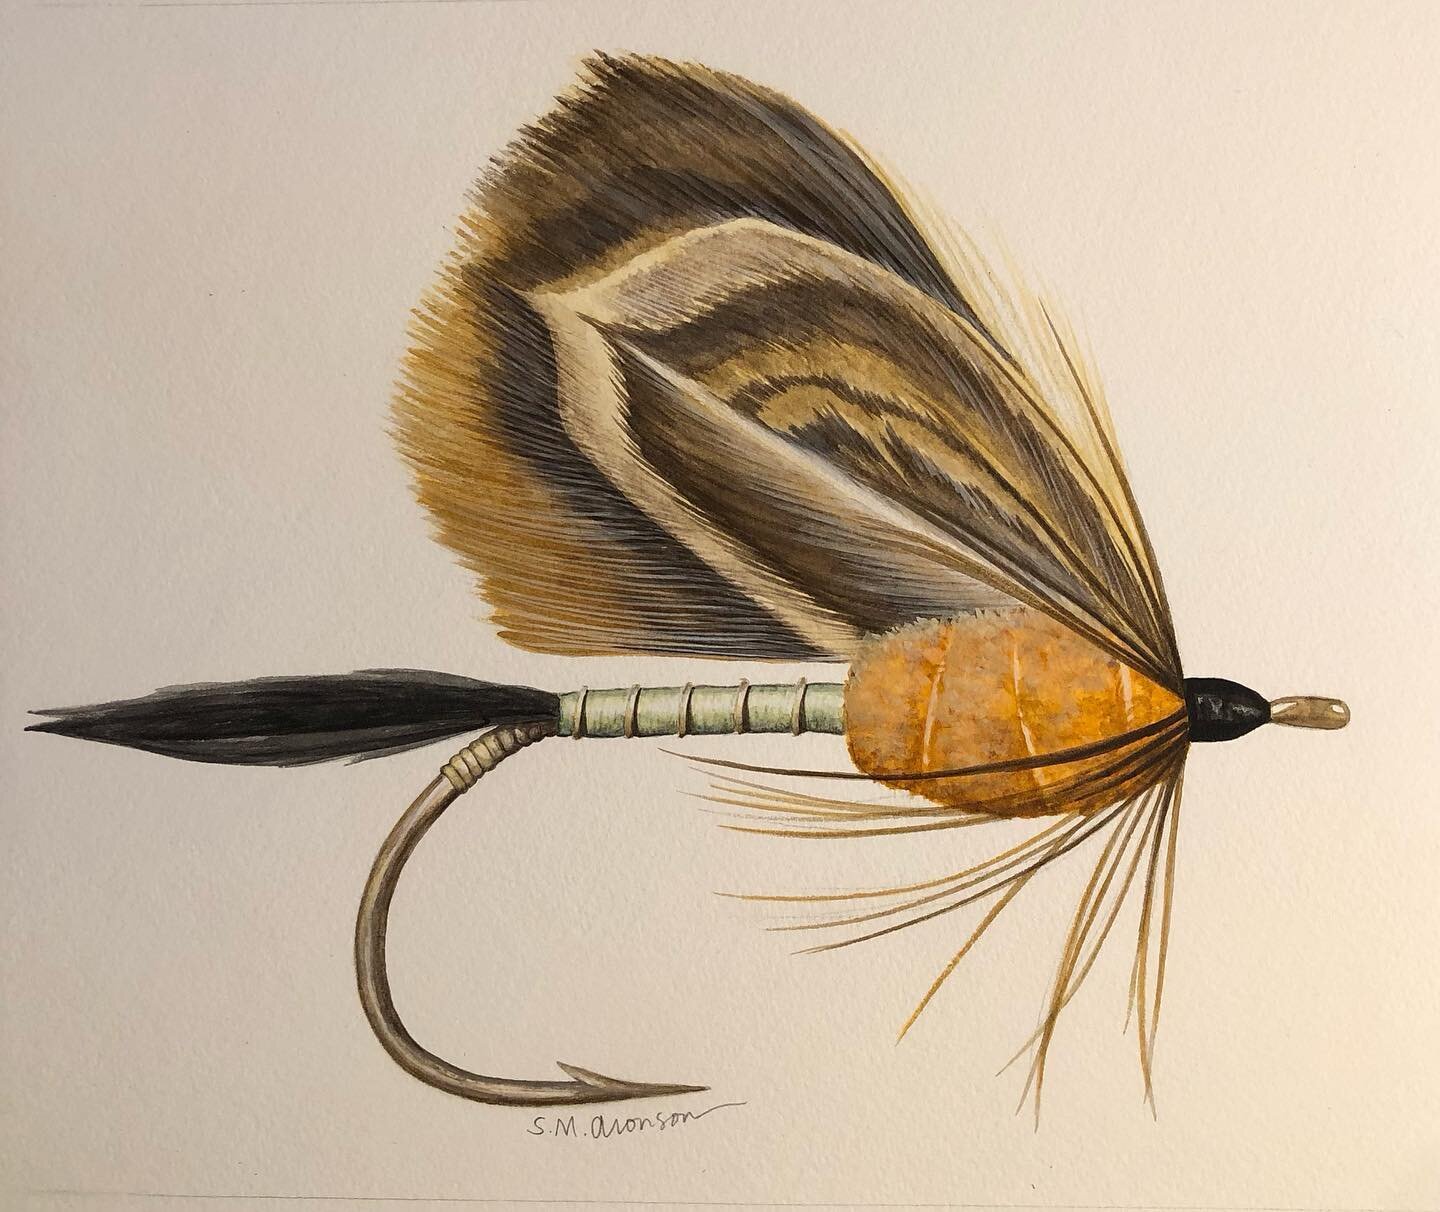 New work. Commissioned piece. This is the Ondawa fly. A Mary Orvis Marbury classic. I&rsquo;m always THRILLED when folks come to me with one of her flies. Open for commissions! I&rsquo;ve got a few openings so let&rsquo;s talk! #maryorvismarbury #cla